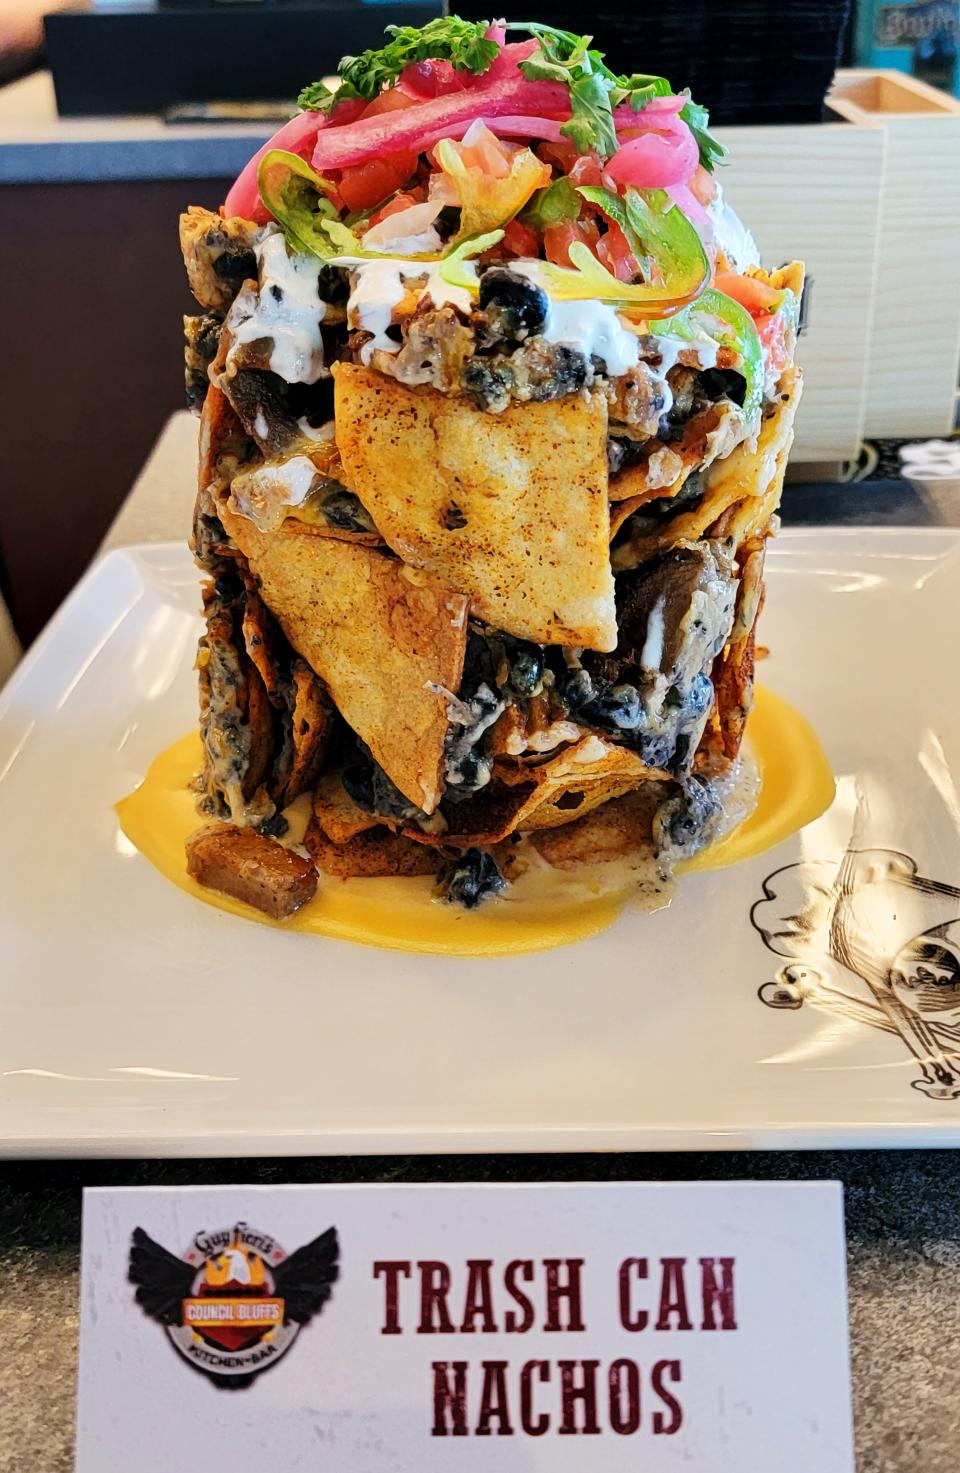 Trash Can Nachos at Guy Fieri's Kitchen + Bar in Council Bluffs is one of the staple dishes on a Fieri menu.